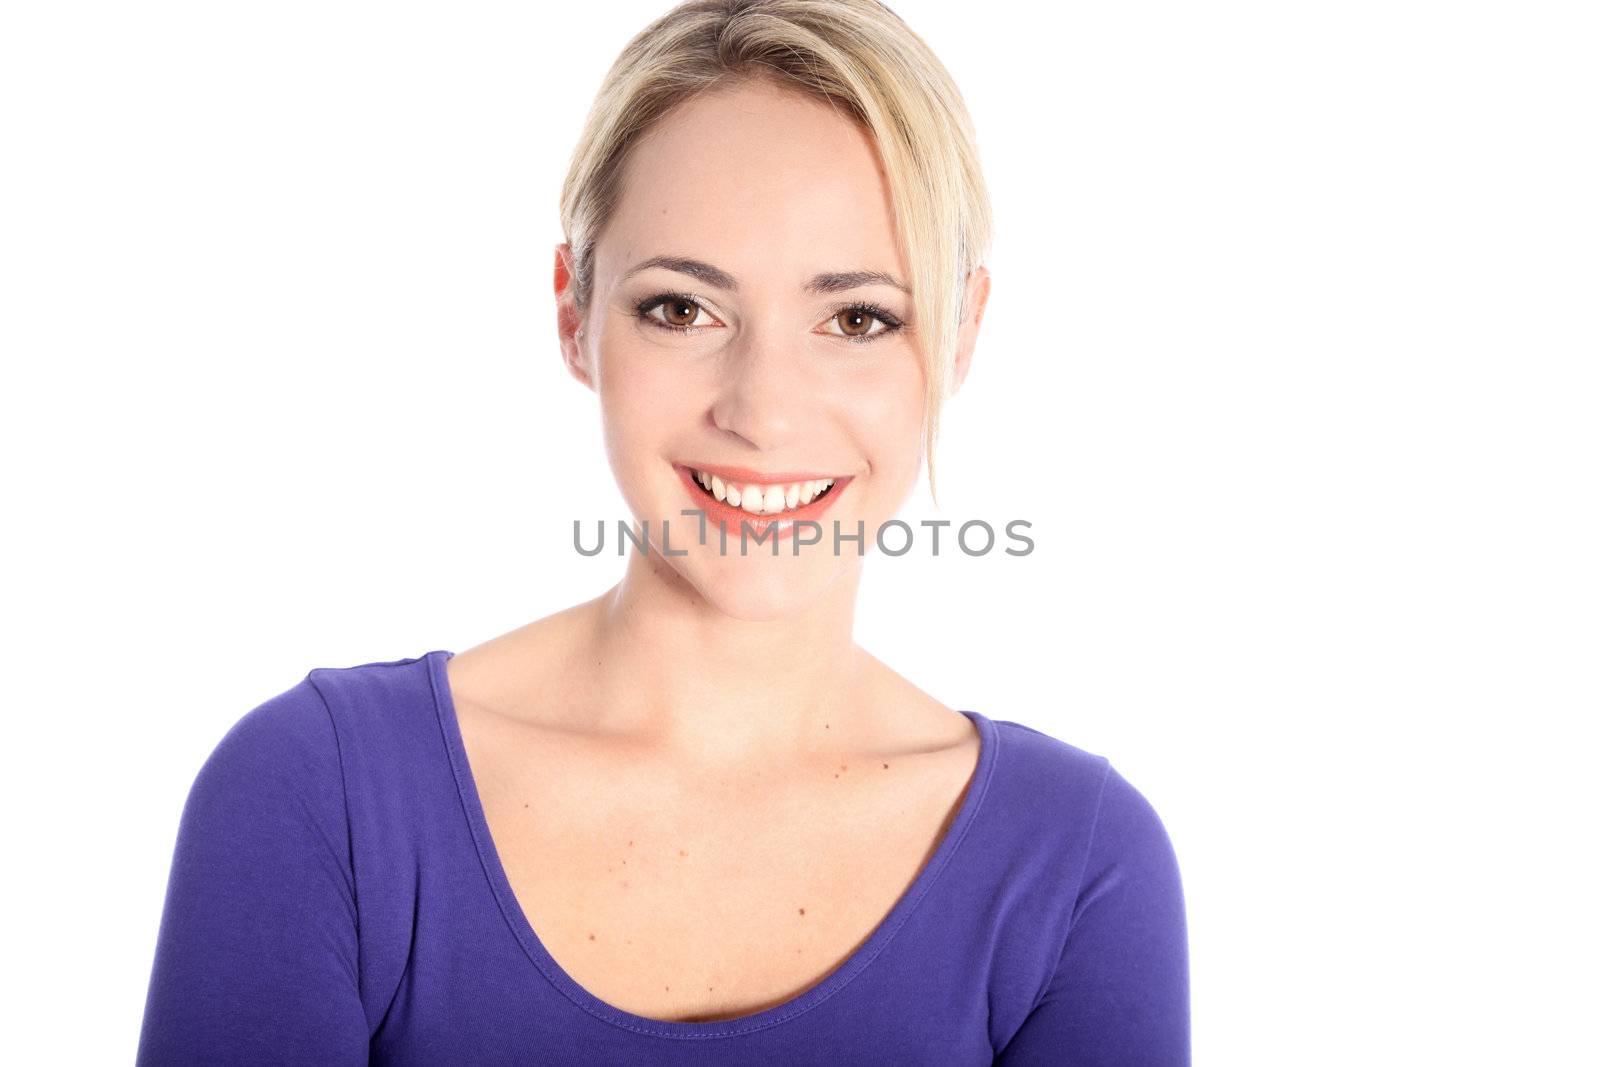 Portrait of Smiling Blonde Woman on White Portrait of Smiling Blonde Woman on White by Farina6000